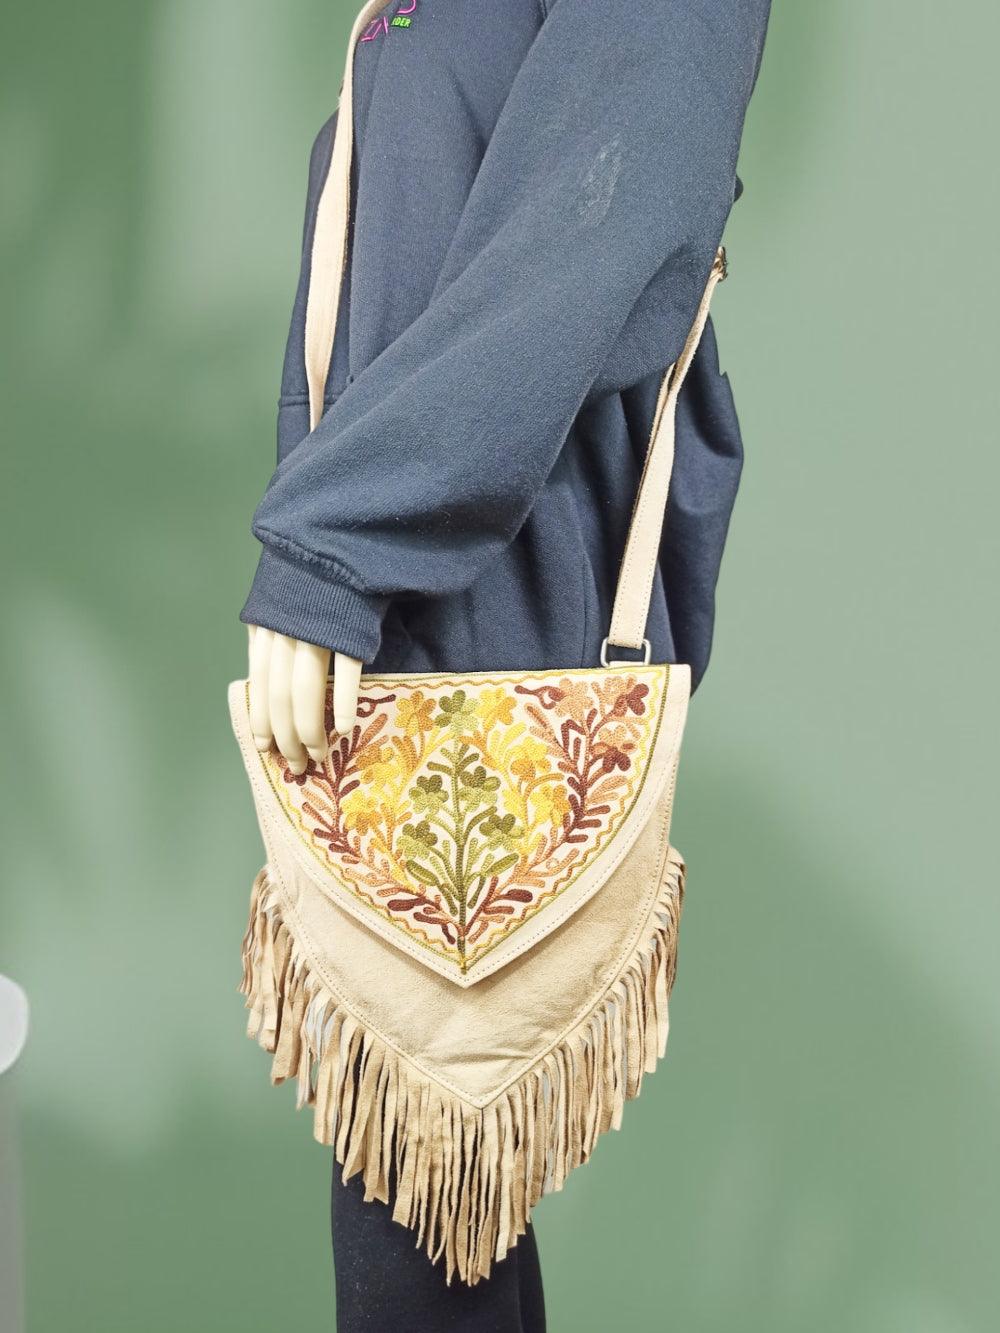 Suede Leather Heart Bag | Embroidery Heart Bag |  Sling Bag For Girls